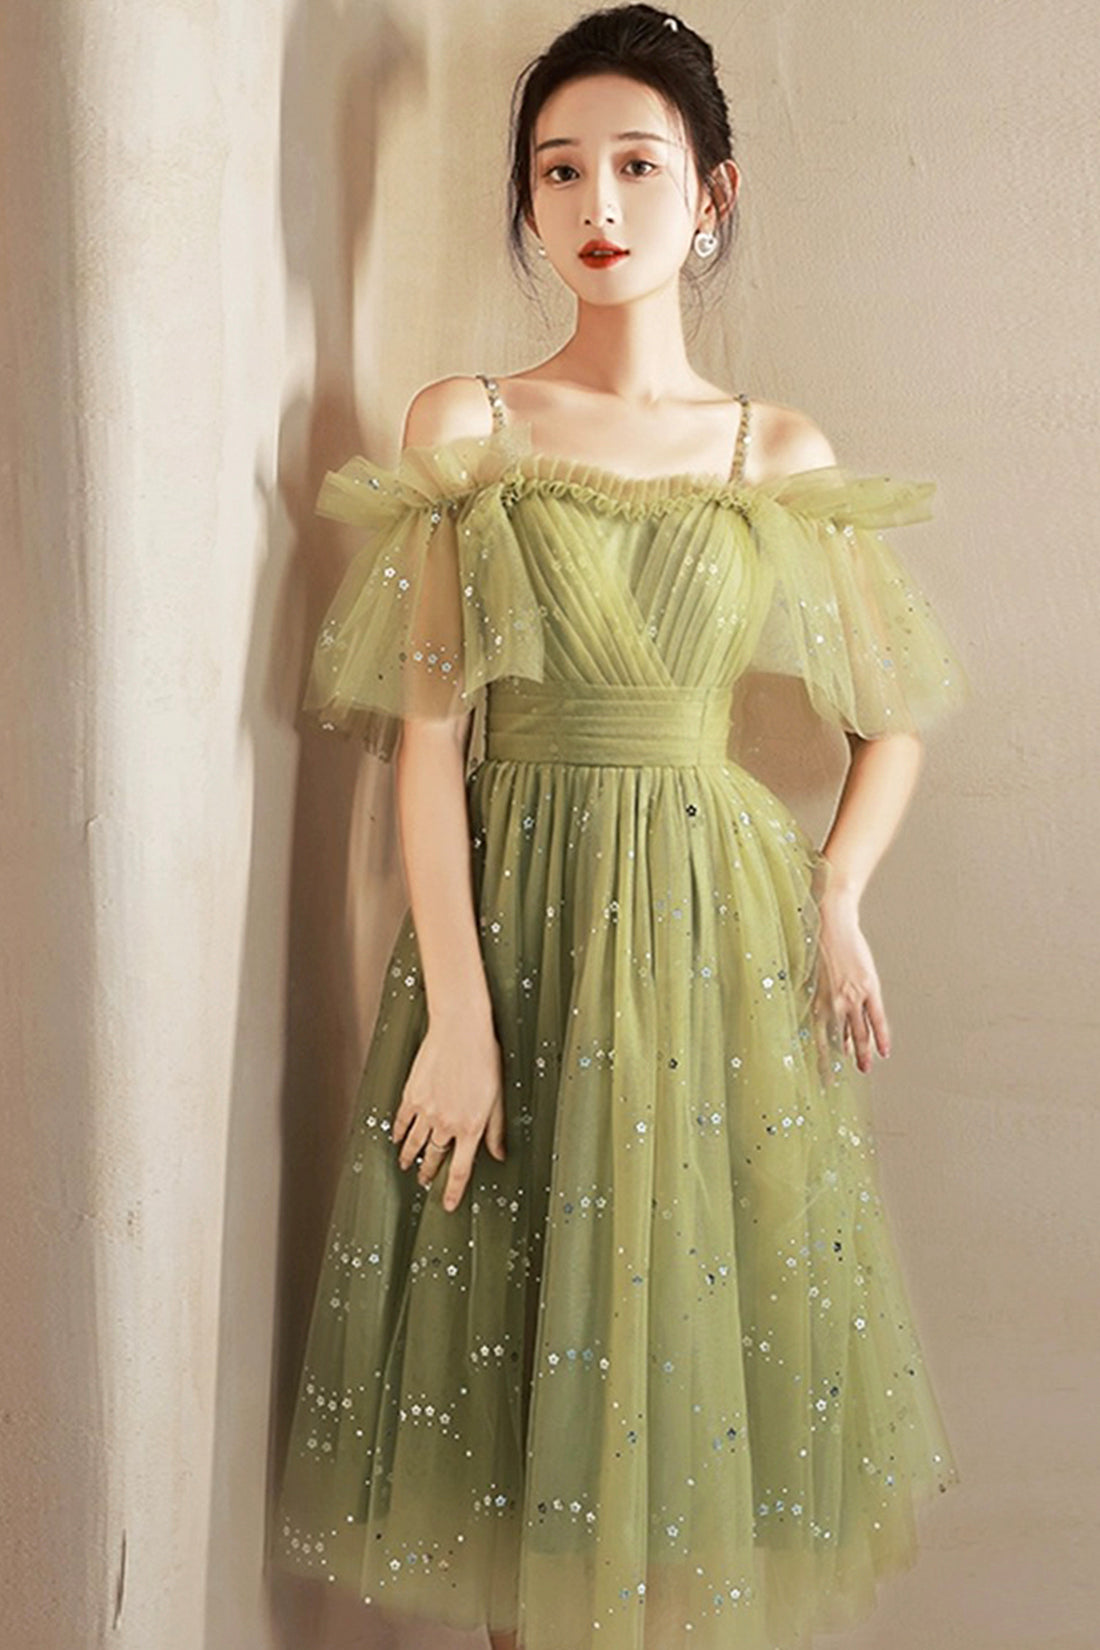 Green Spaghetti Strap Tulle Short Prom Dress, Charming Knee Length A-Line Party Dress